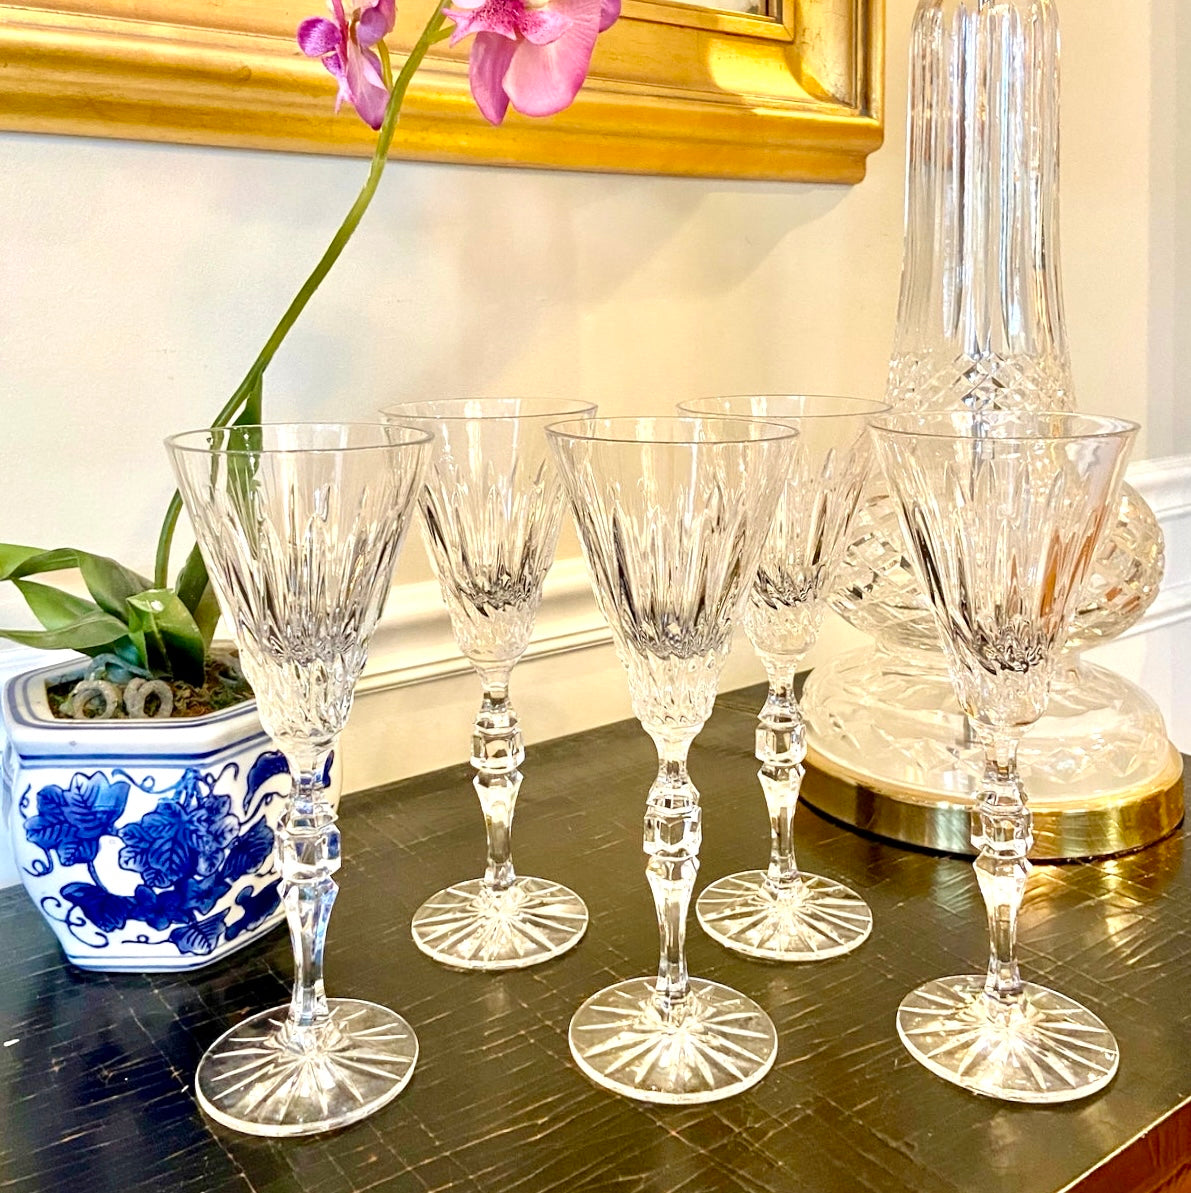 Stunning Set of 5 statuesque crystal wine glasses.